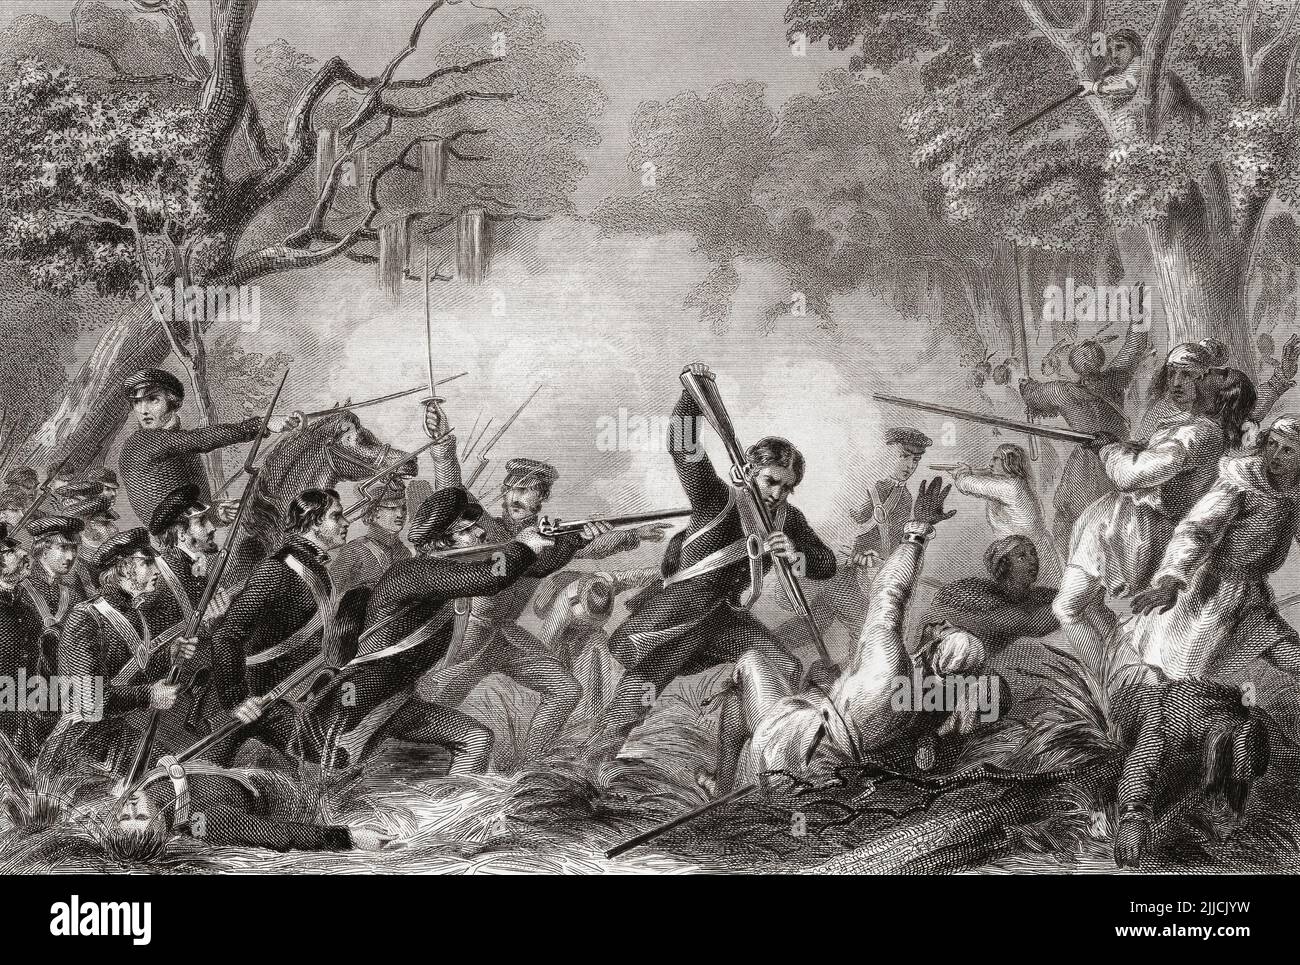 The Battle of Lake Okeechobee, December 25, 1837 during the Second Seminole War aka The Florida War, 1835 - 1842.  After a 19th century work. Stock Photo